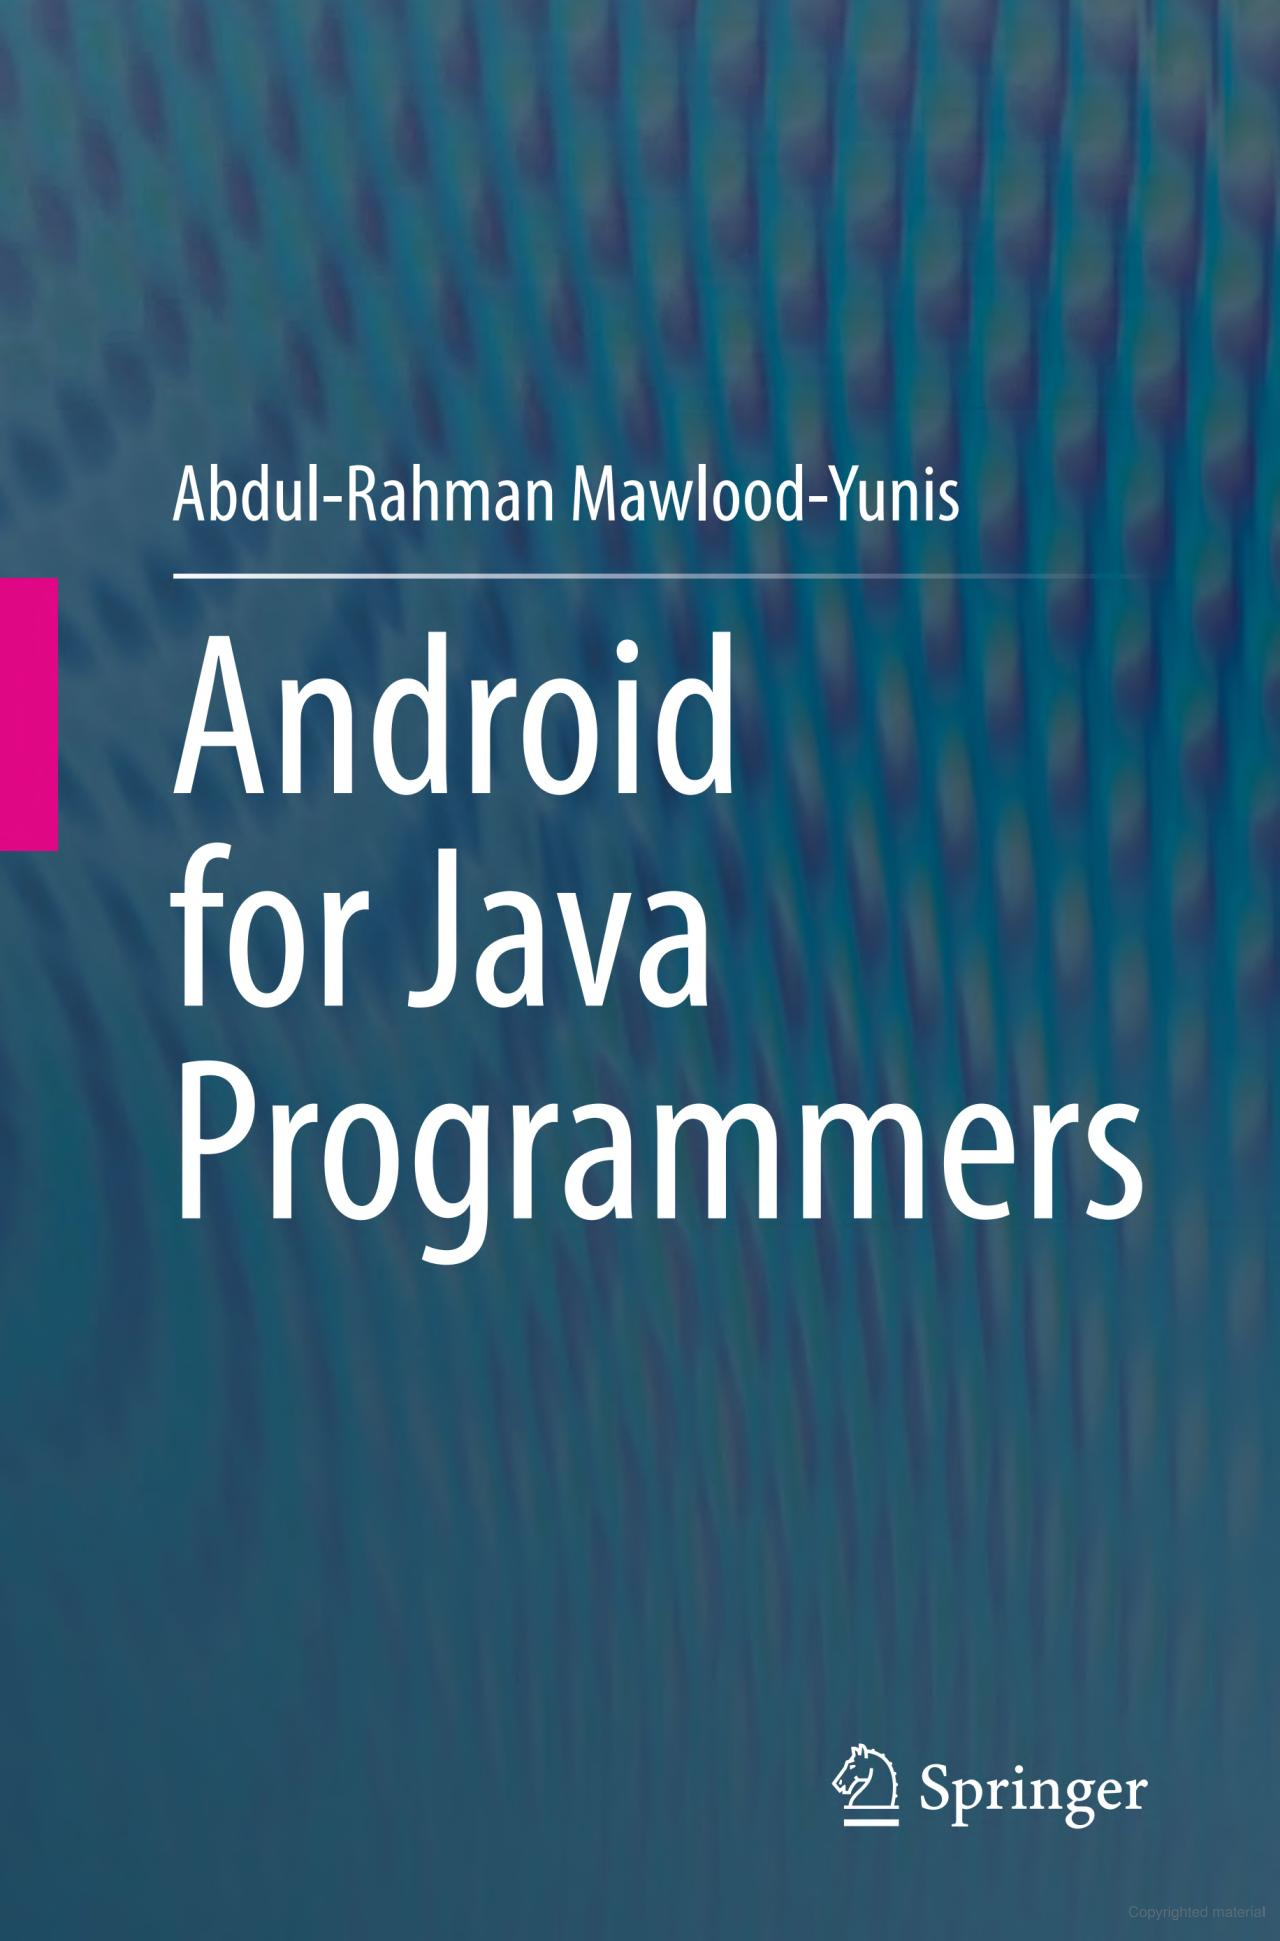 https://www.google.ca/books/edition/Android_for_Java_Programmers/WD53EAAAQBAJ?hl=en&gbpv=1&printsec=frontcover